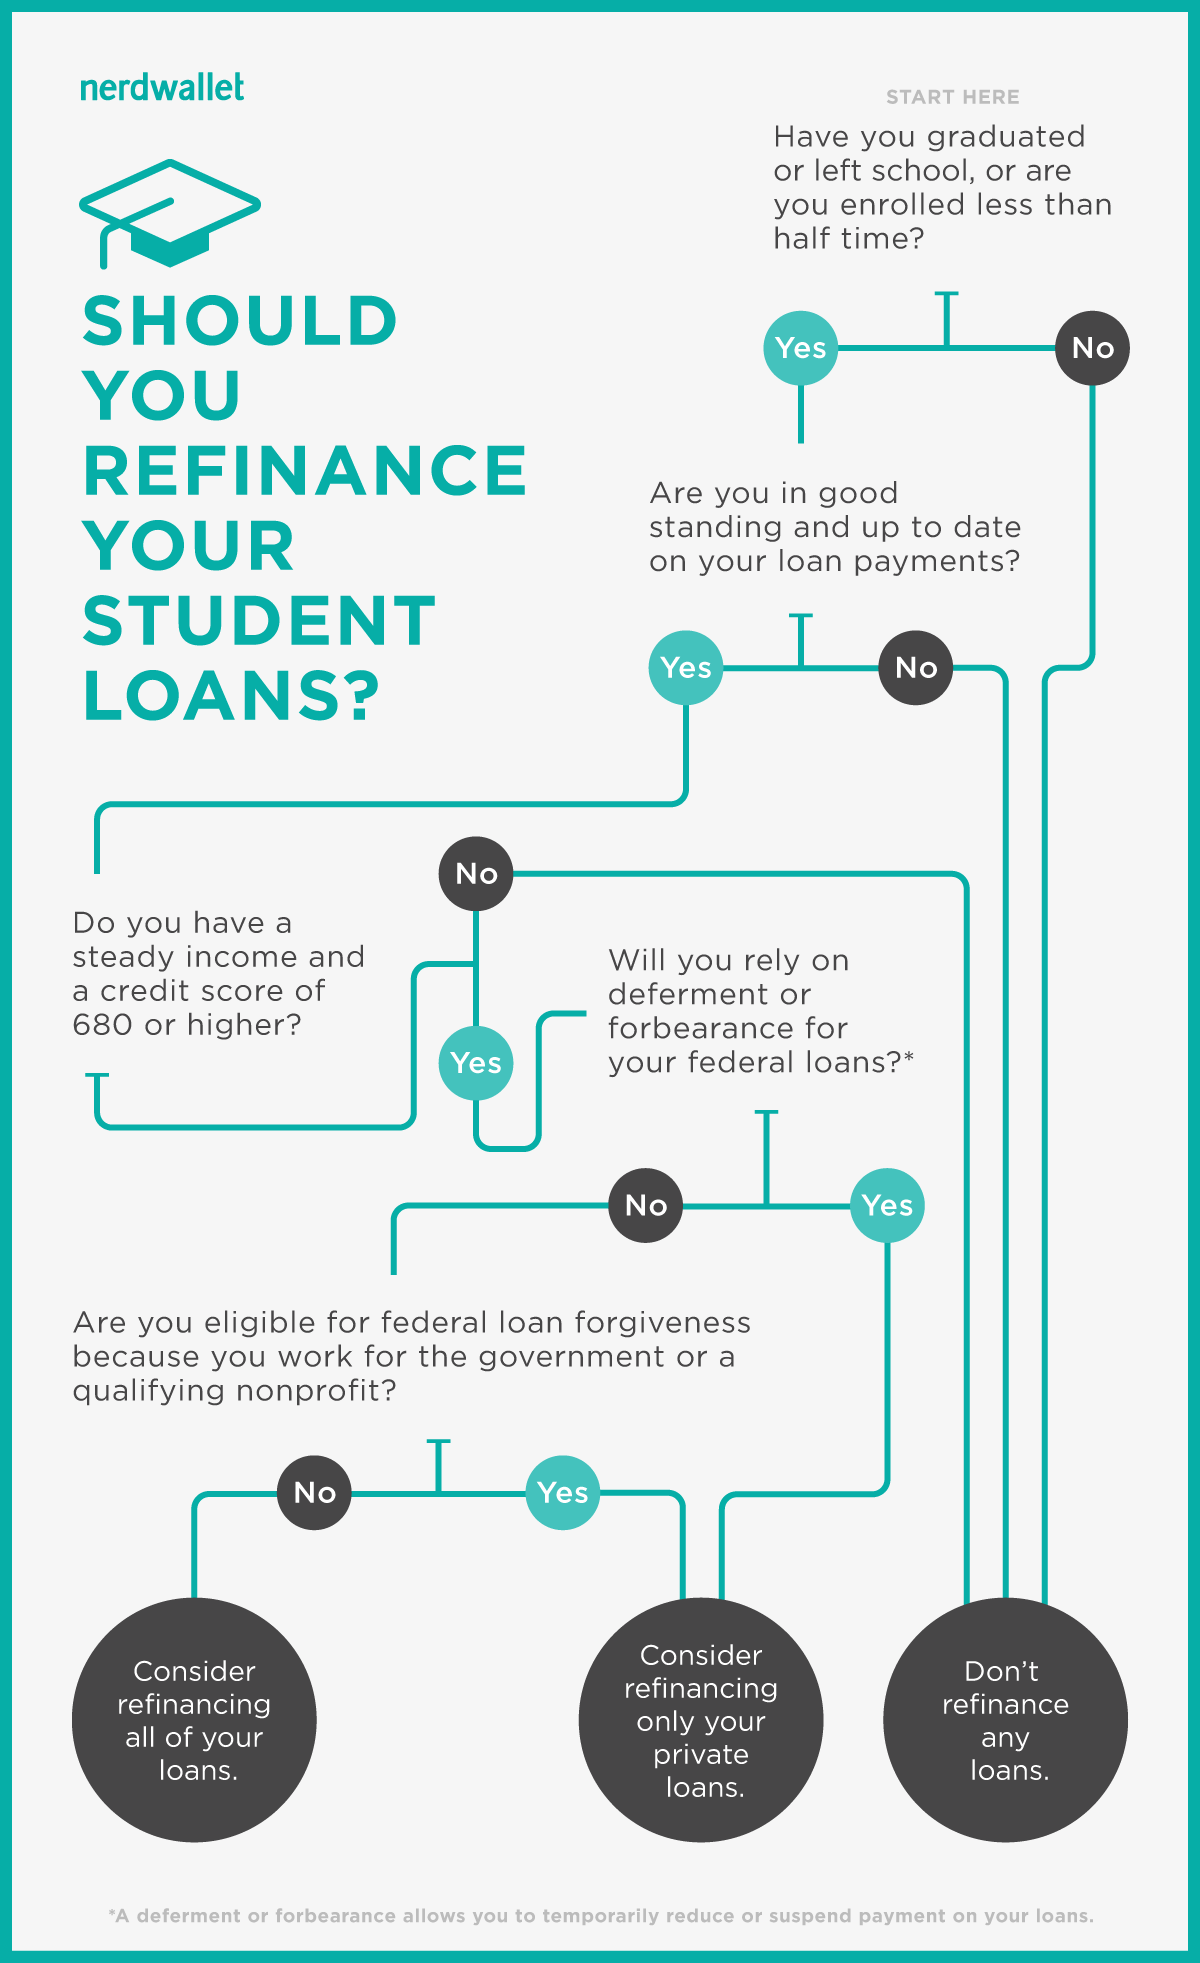 Use This Infographic to Decide If You Should Refinance ...